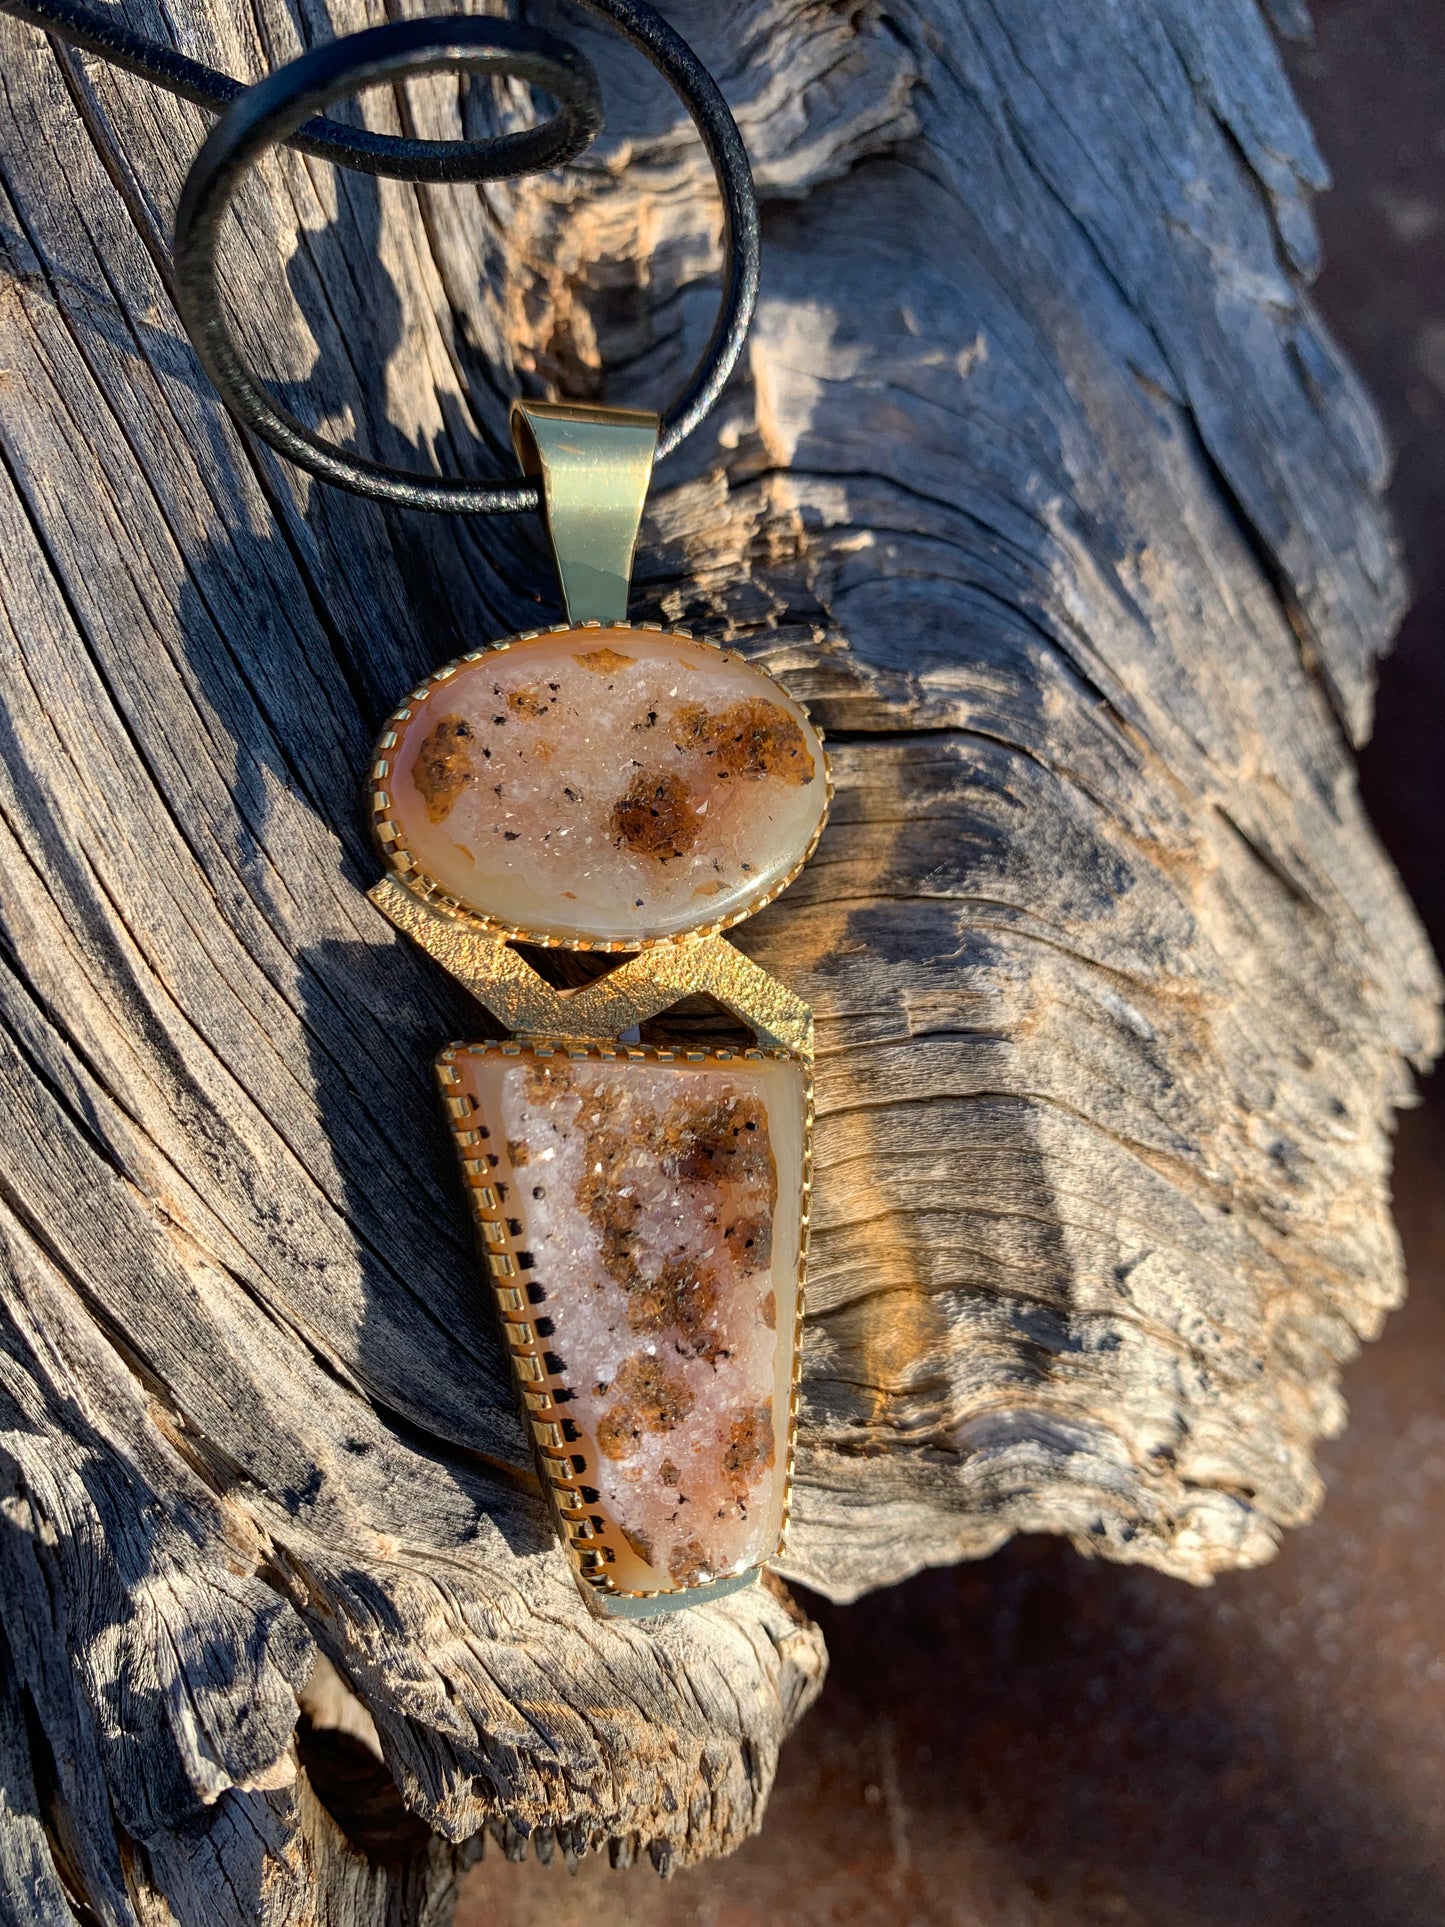 Gail Bird And Yazzie Johnson Pendant of Spotted Drusy Quartz in 18kt - Turquoise & Tufa